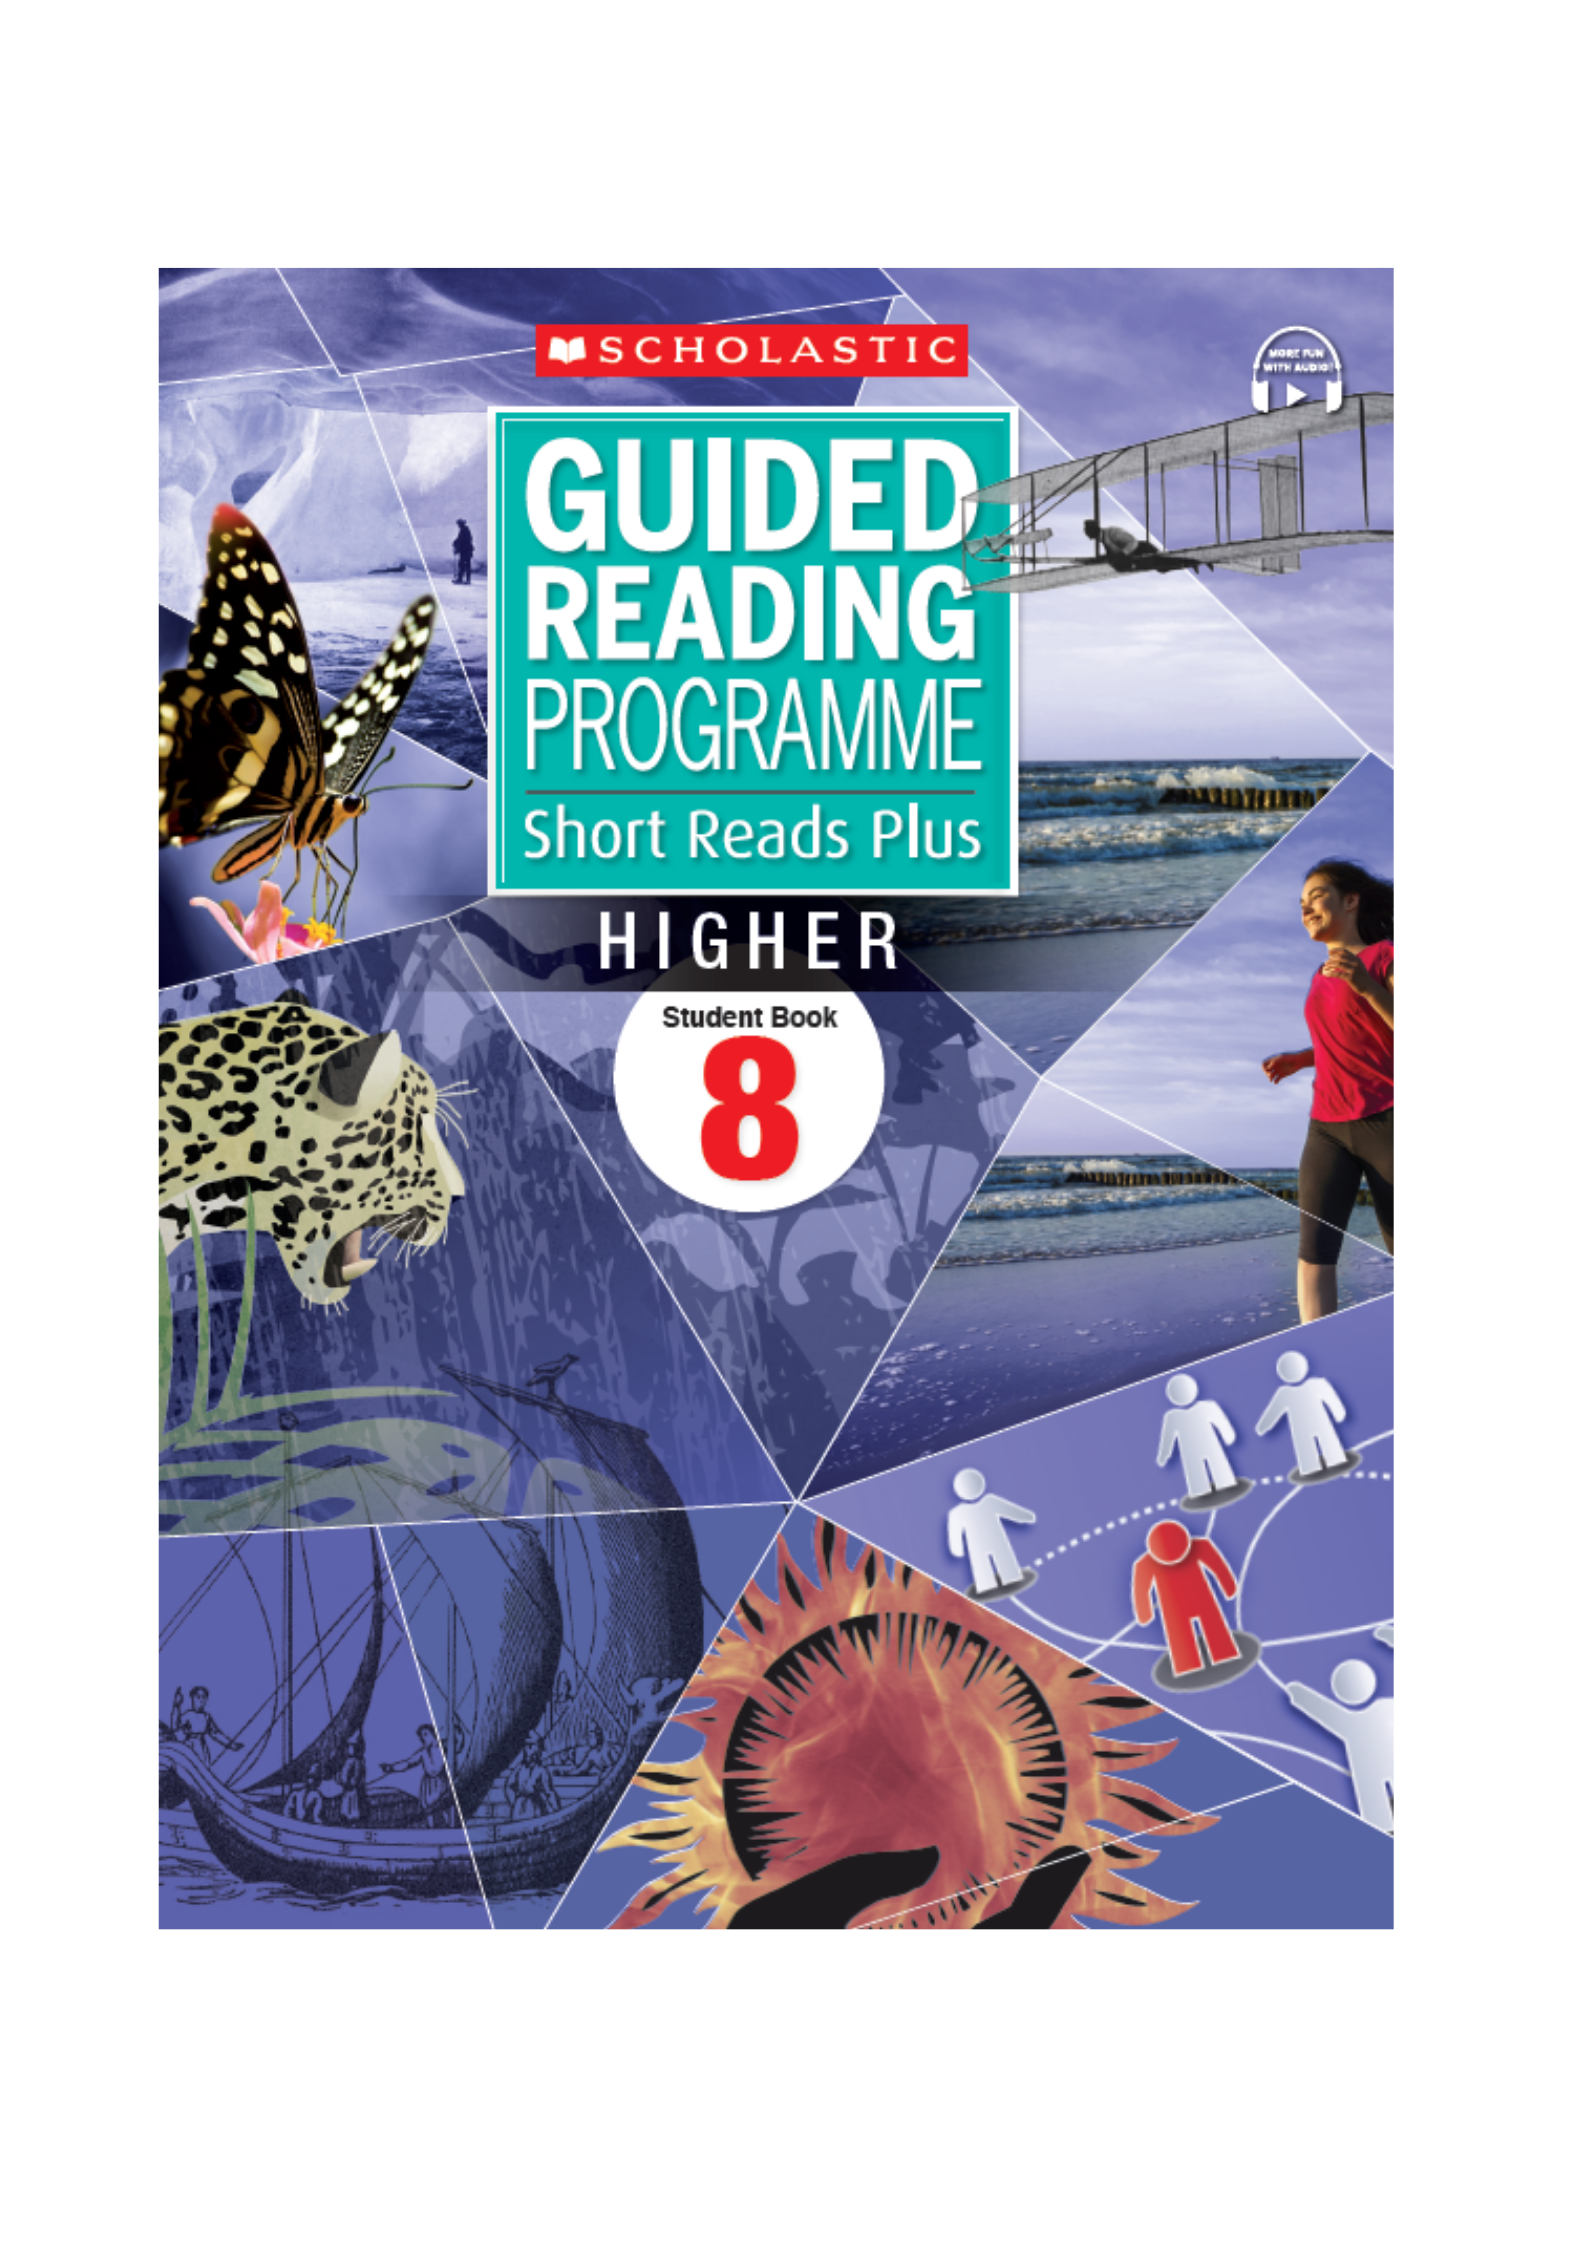 Guided Reading Short Reads Plus Higher Student Book – Level 8 (Asia)